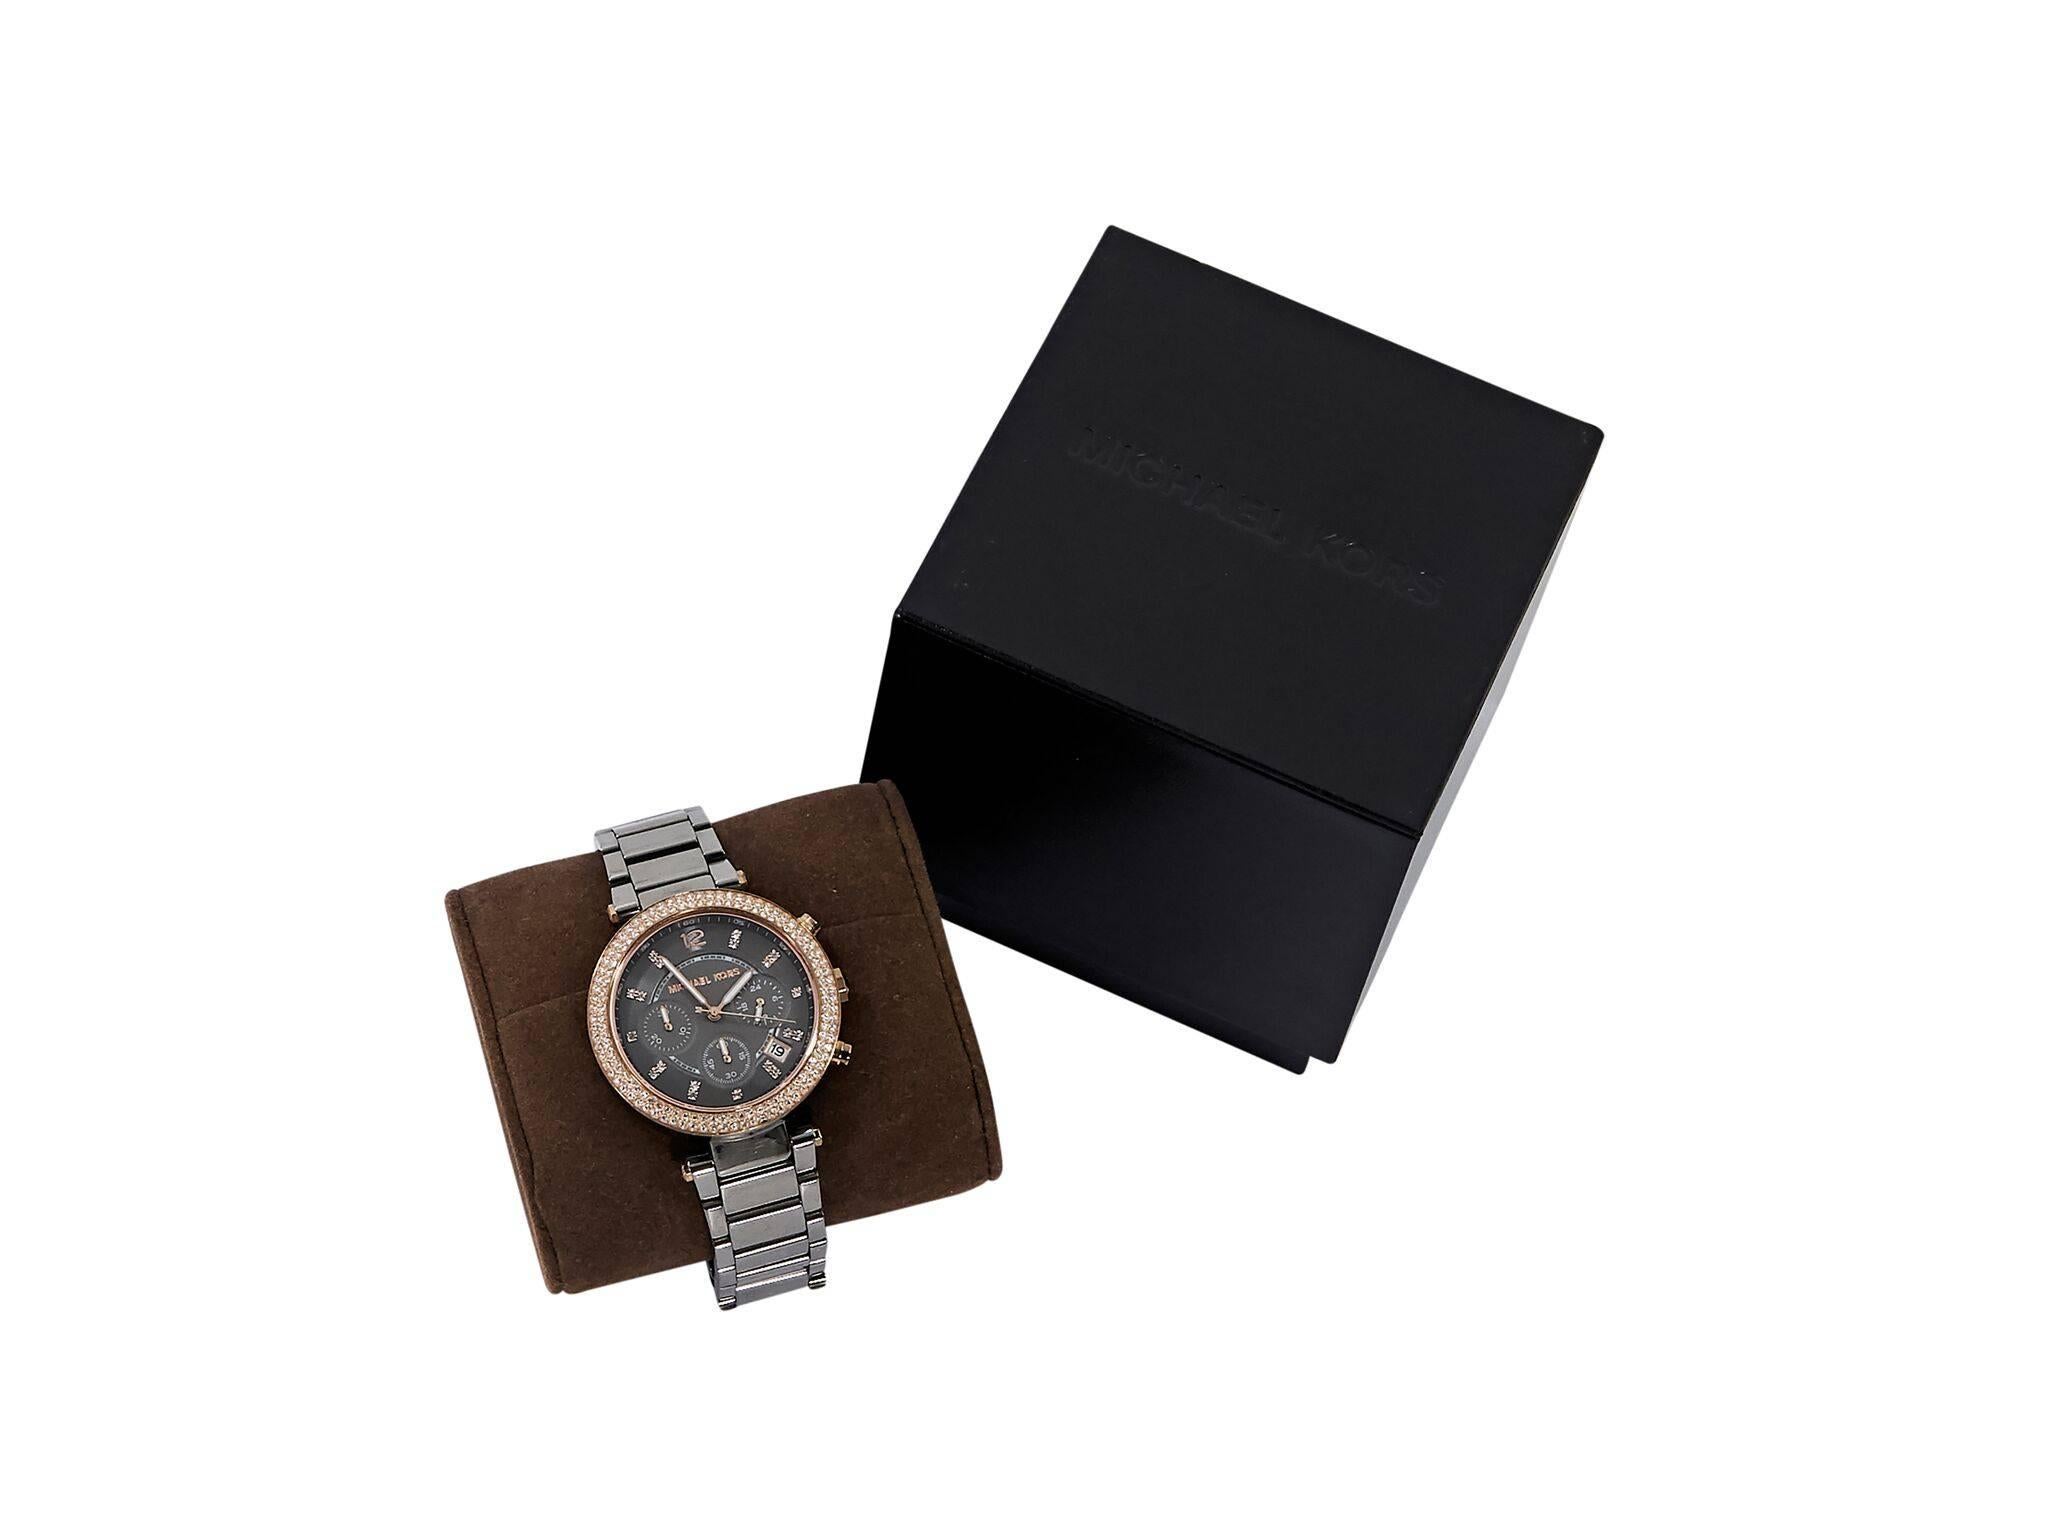 Product details:  Gunmetal-tone stainless steel watch by Michael Kors.  Rose gold-tone bezel embellished with crystals.  Hour, minute and second hands.  Crystal hour markers and Arabic numeral 12:00.  Date display between 4:00 and 5:00.  Three